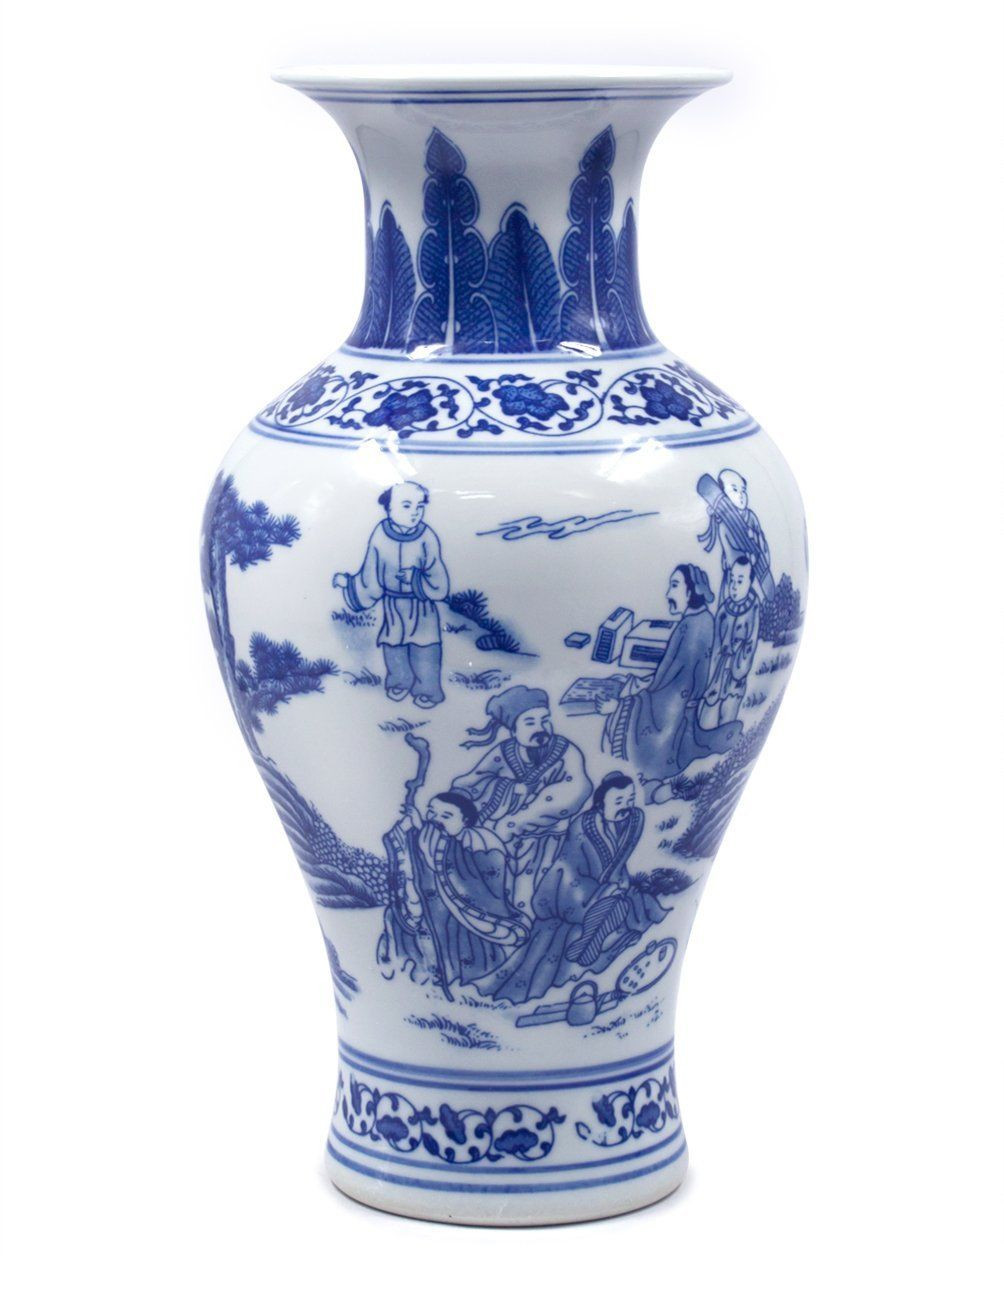 navajo wedding vase of dahlia friends enjoying nature blue and white porcelain flower vase with regard to dahlia friends enjoying nature blue and white porcelain flower vase 13 inches fish tail vase to view further for this item visit the image link